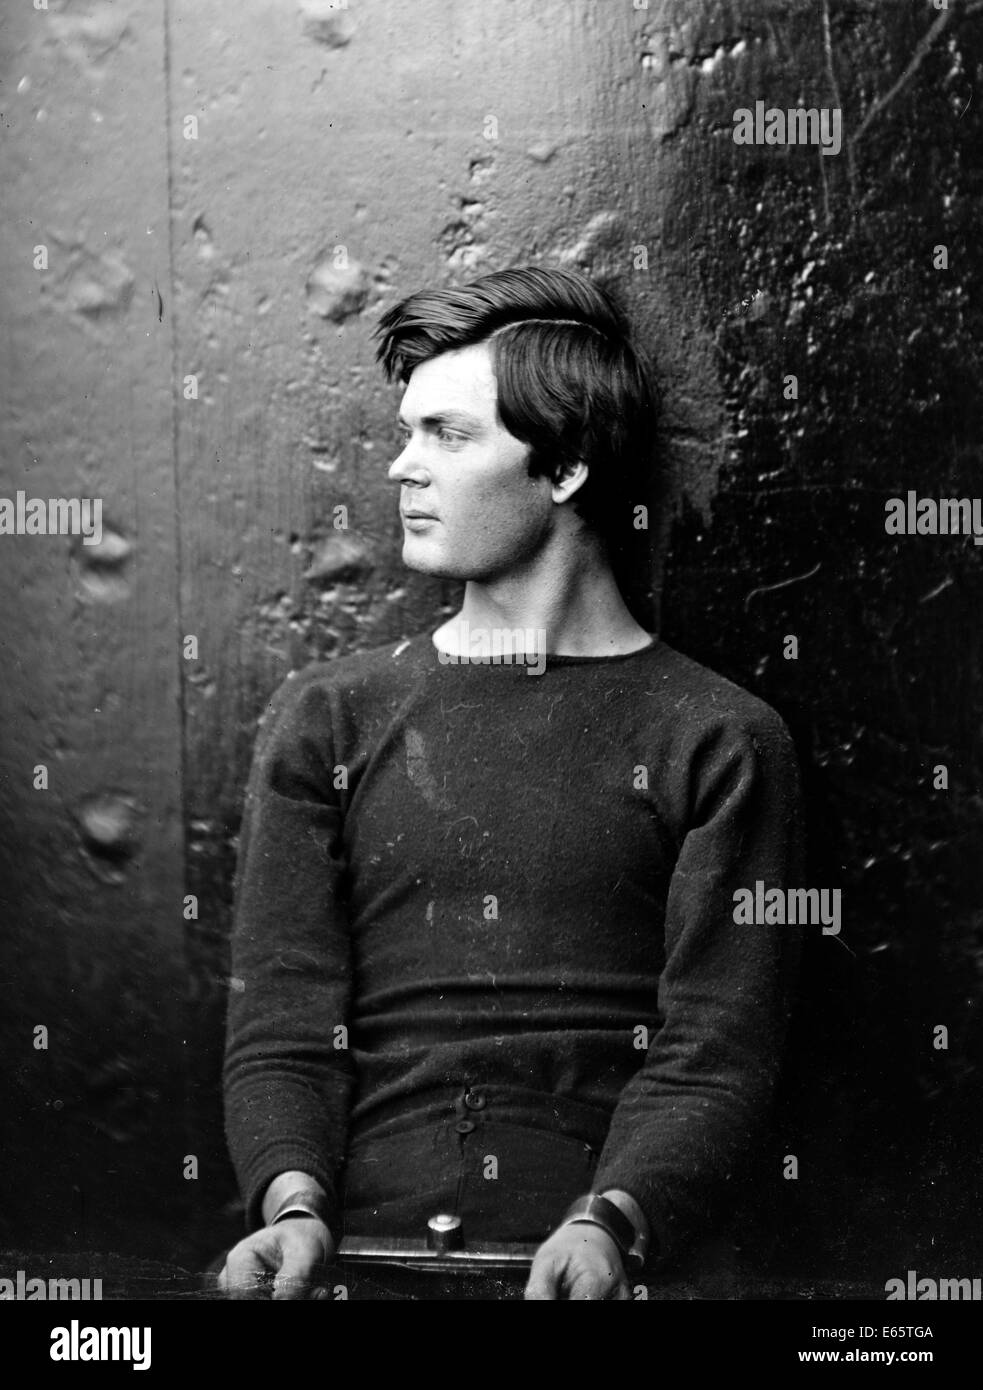 LEWIS POWELL (1844-1865) Confederate States Army officer involved in the Lincoln assassination - see Description below. Stock Photo